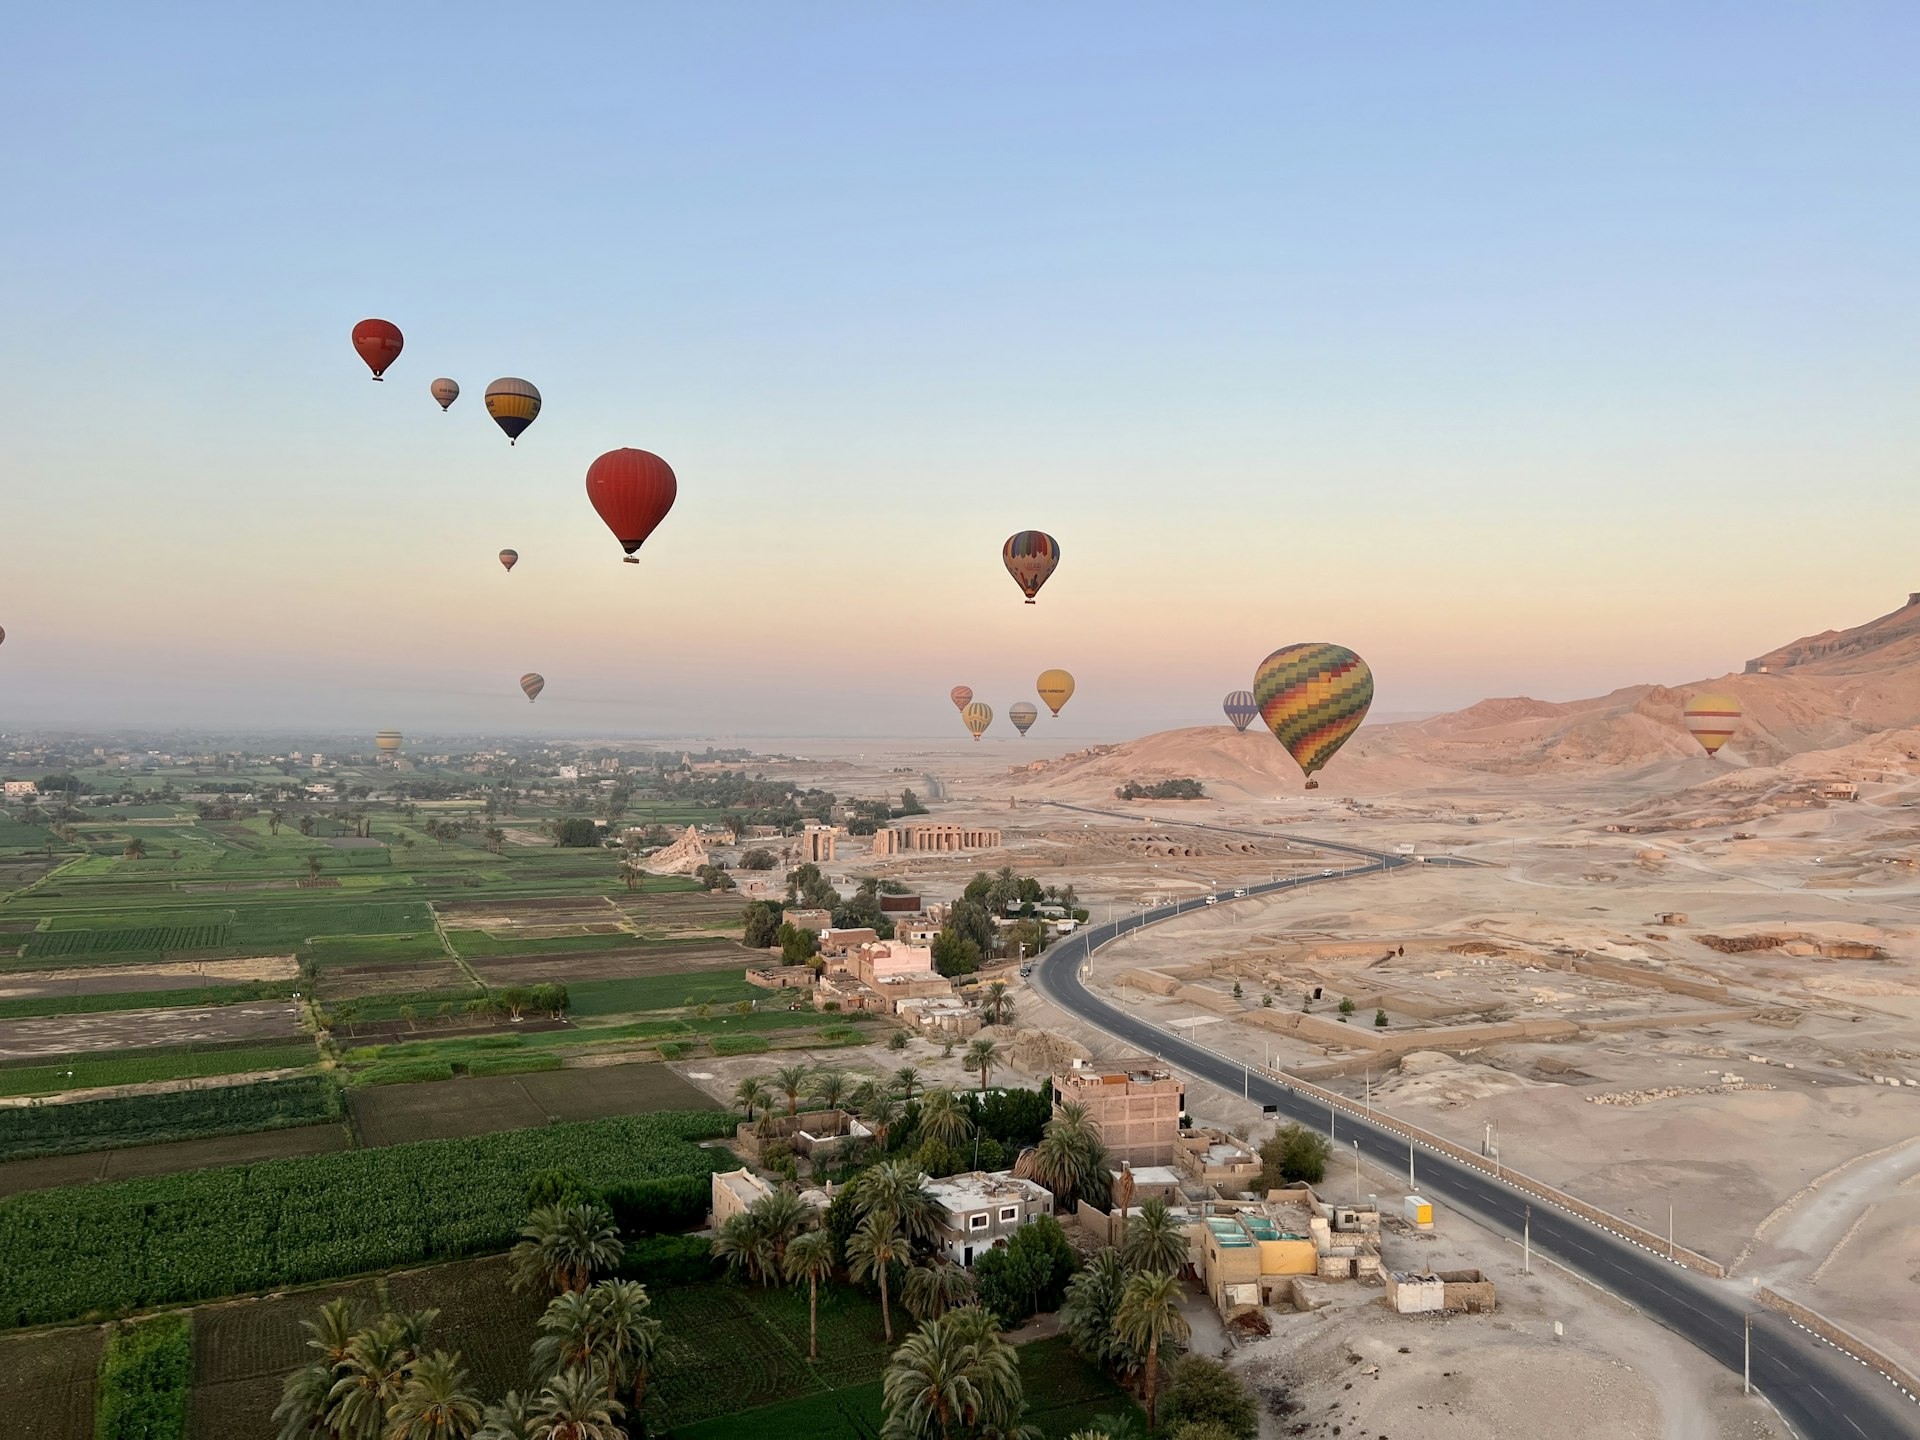 Colourful hot-air balloons fill the sky over a landscape of desert to the right and greenery to the left